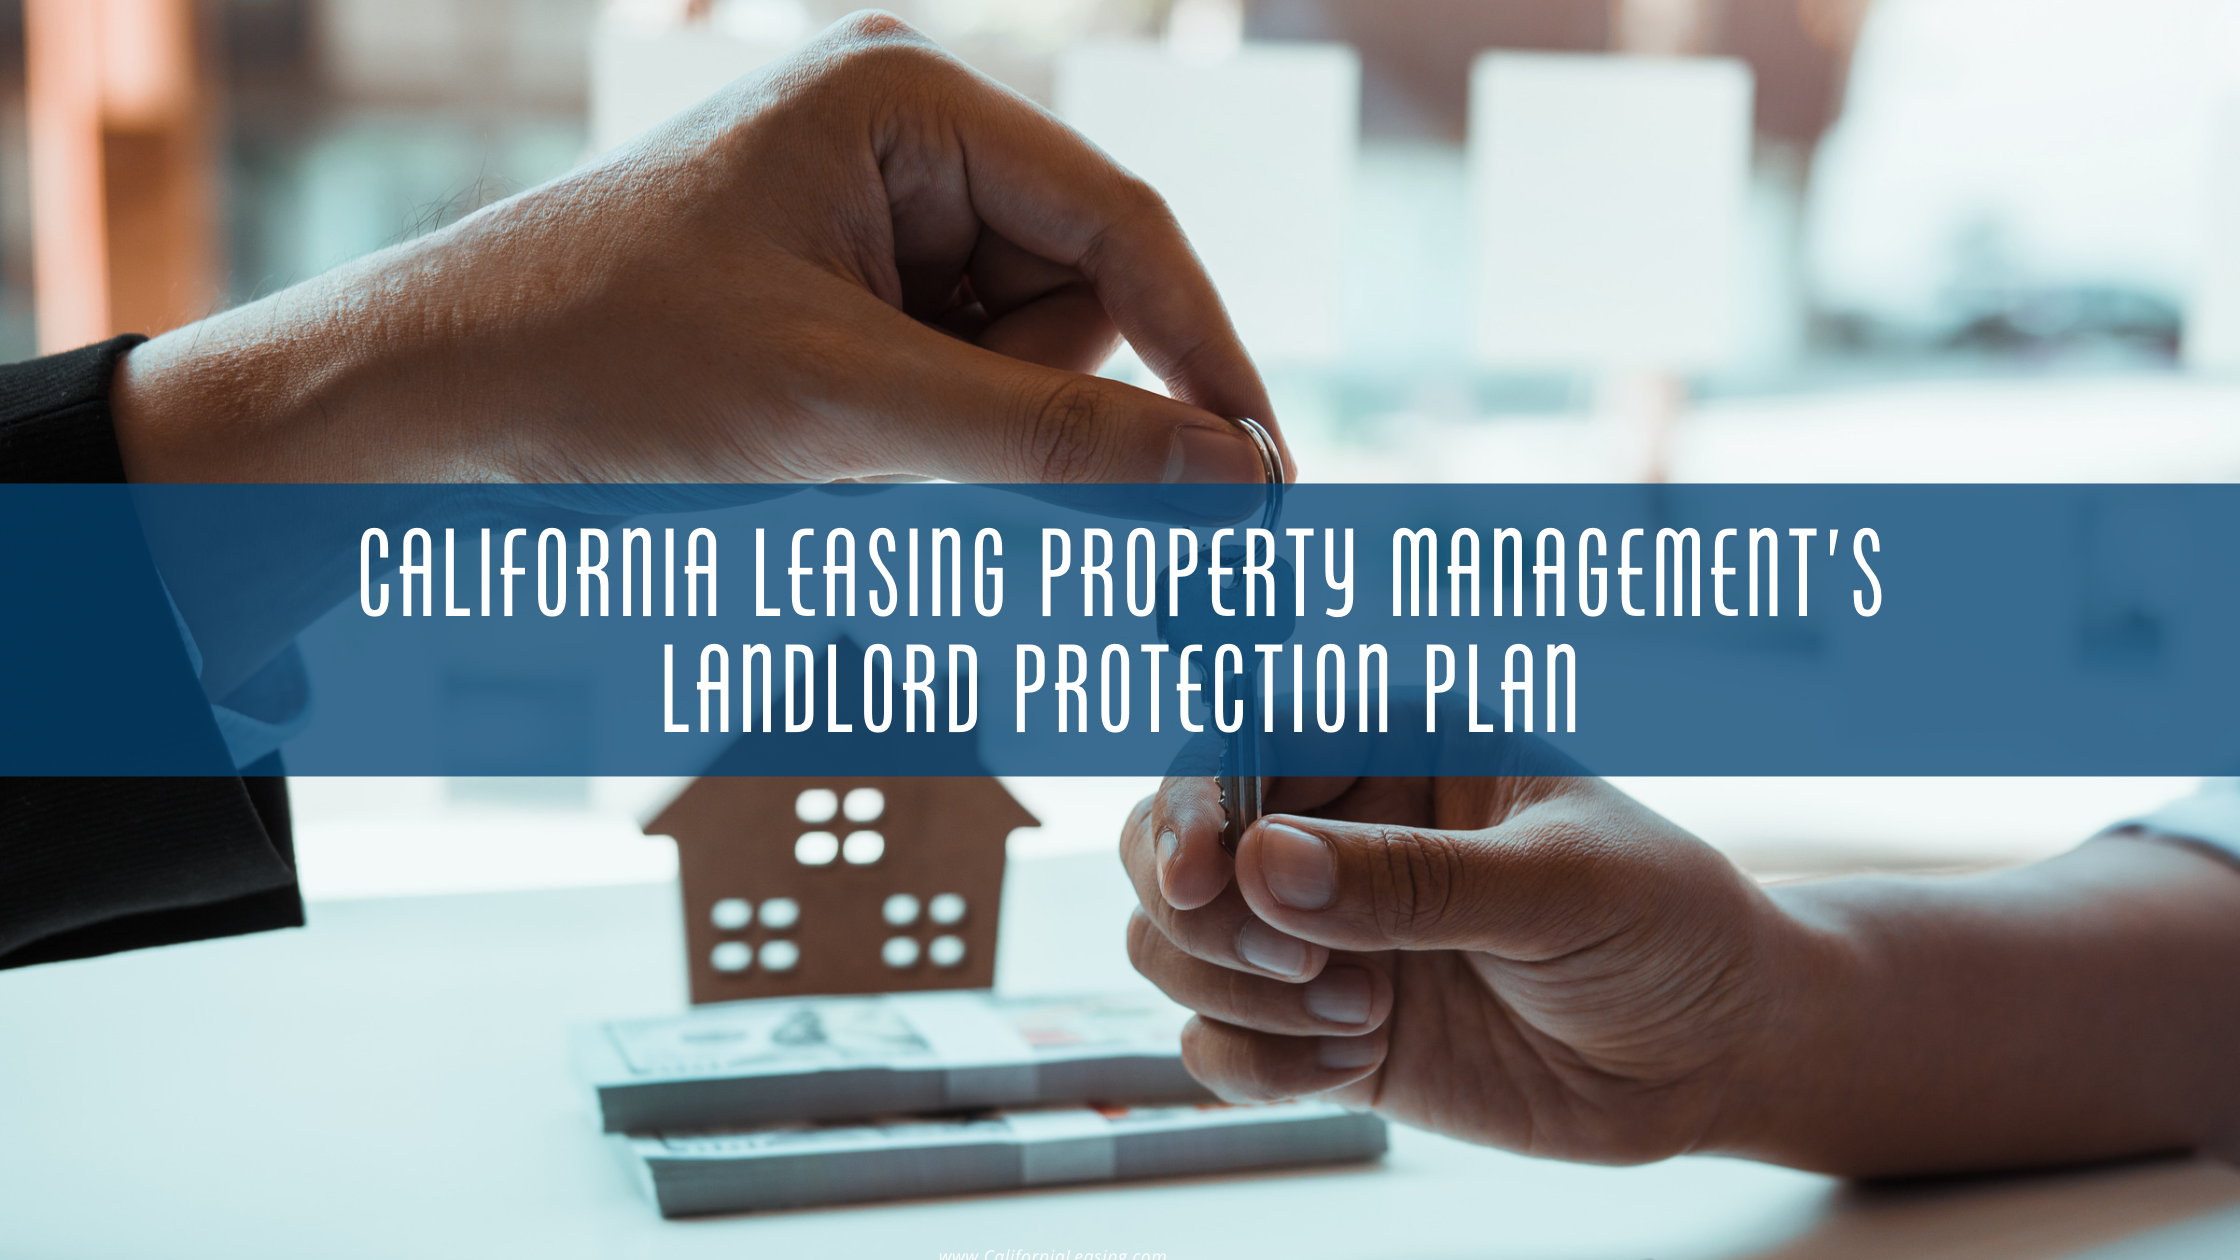 California Leasing Property Management's Landlord Protection Plan